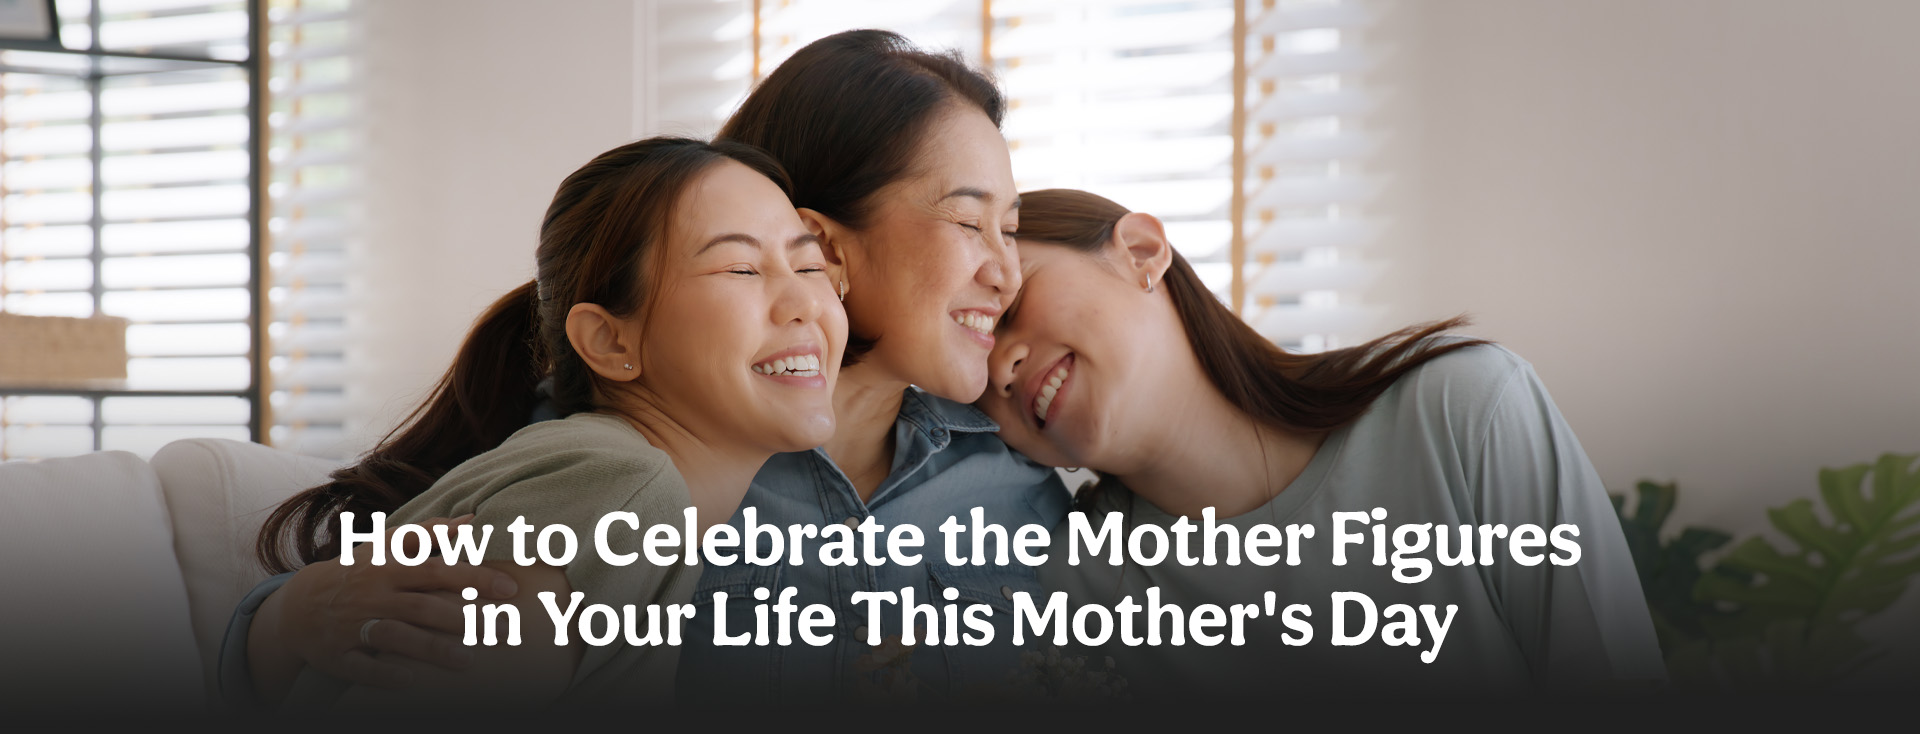 How to Celebrate the Mother Figures in Your Life This Mother's Day